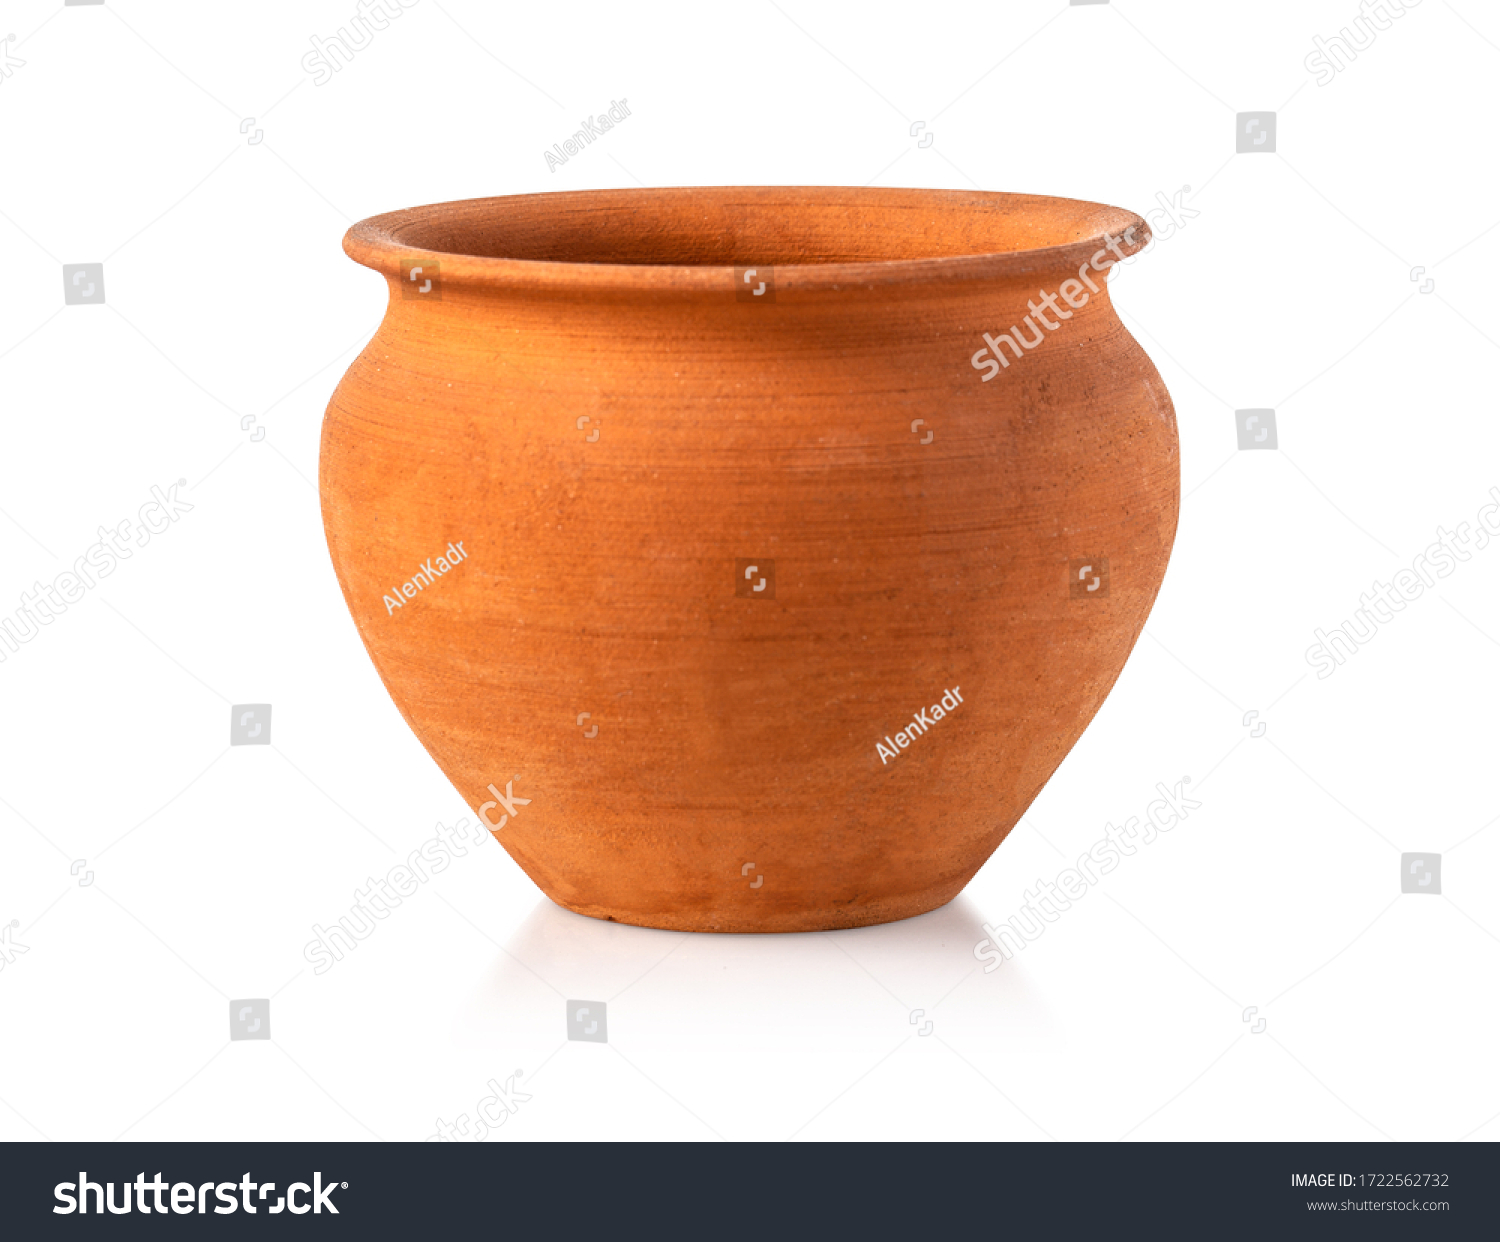 Empty ceramic brown flower pot isolated over the white background with clipping path #1722562732